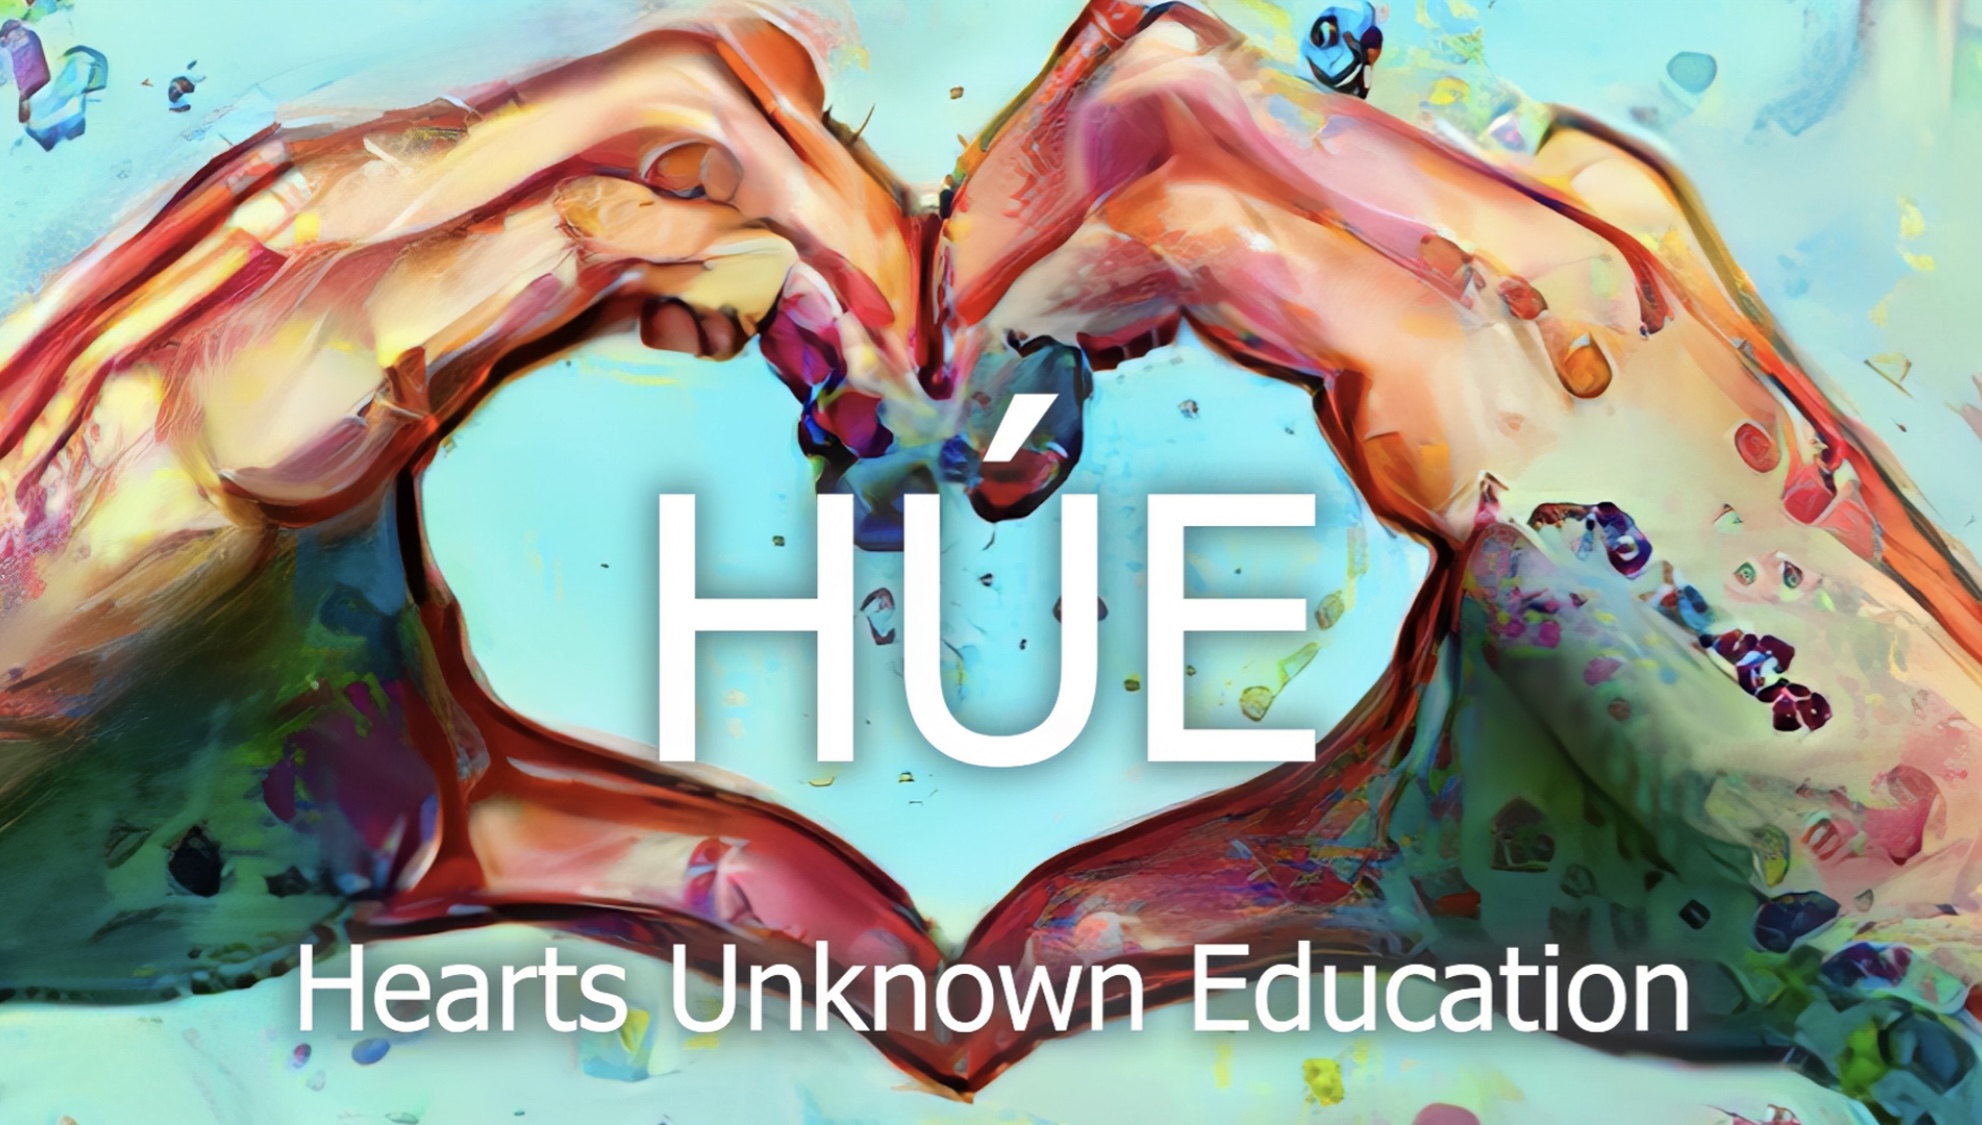 Hearts Unknown Education (HUE)